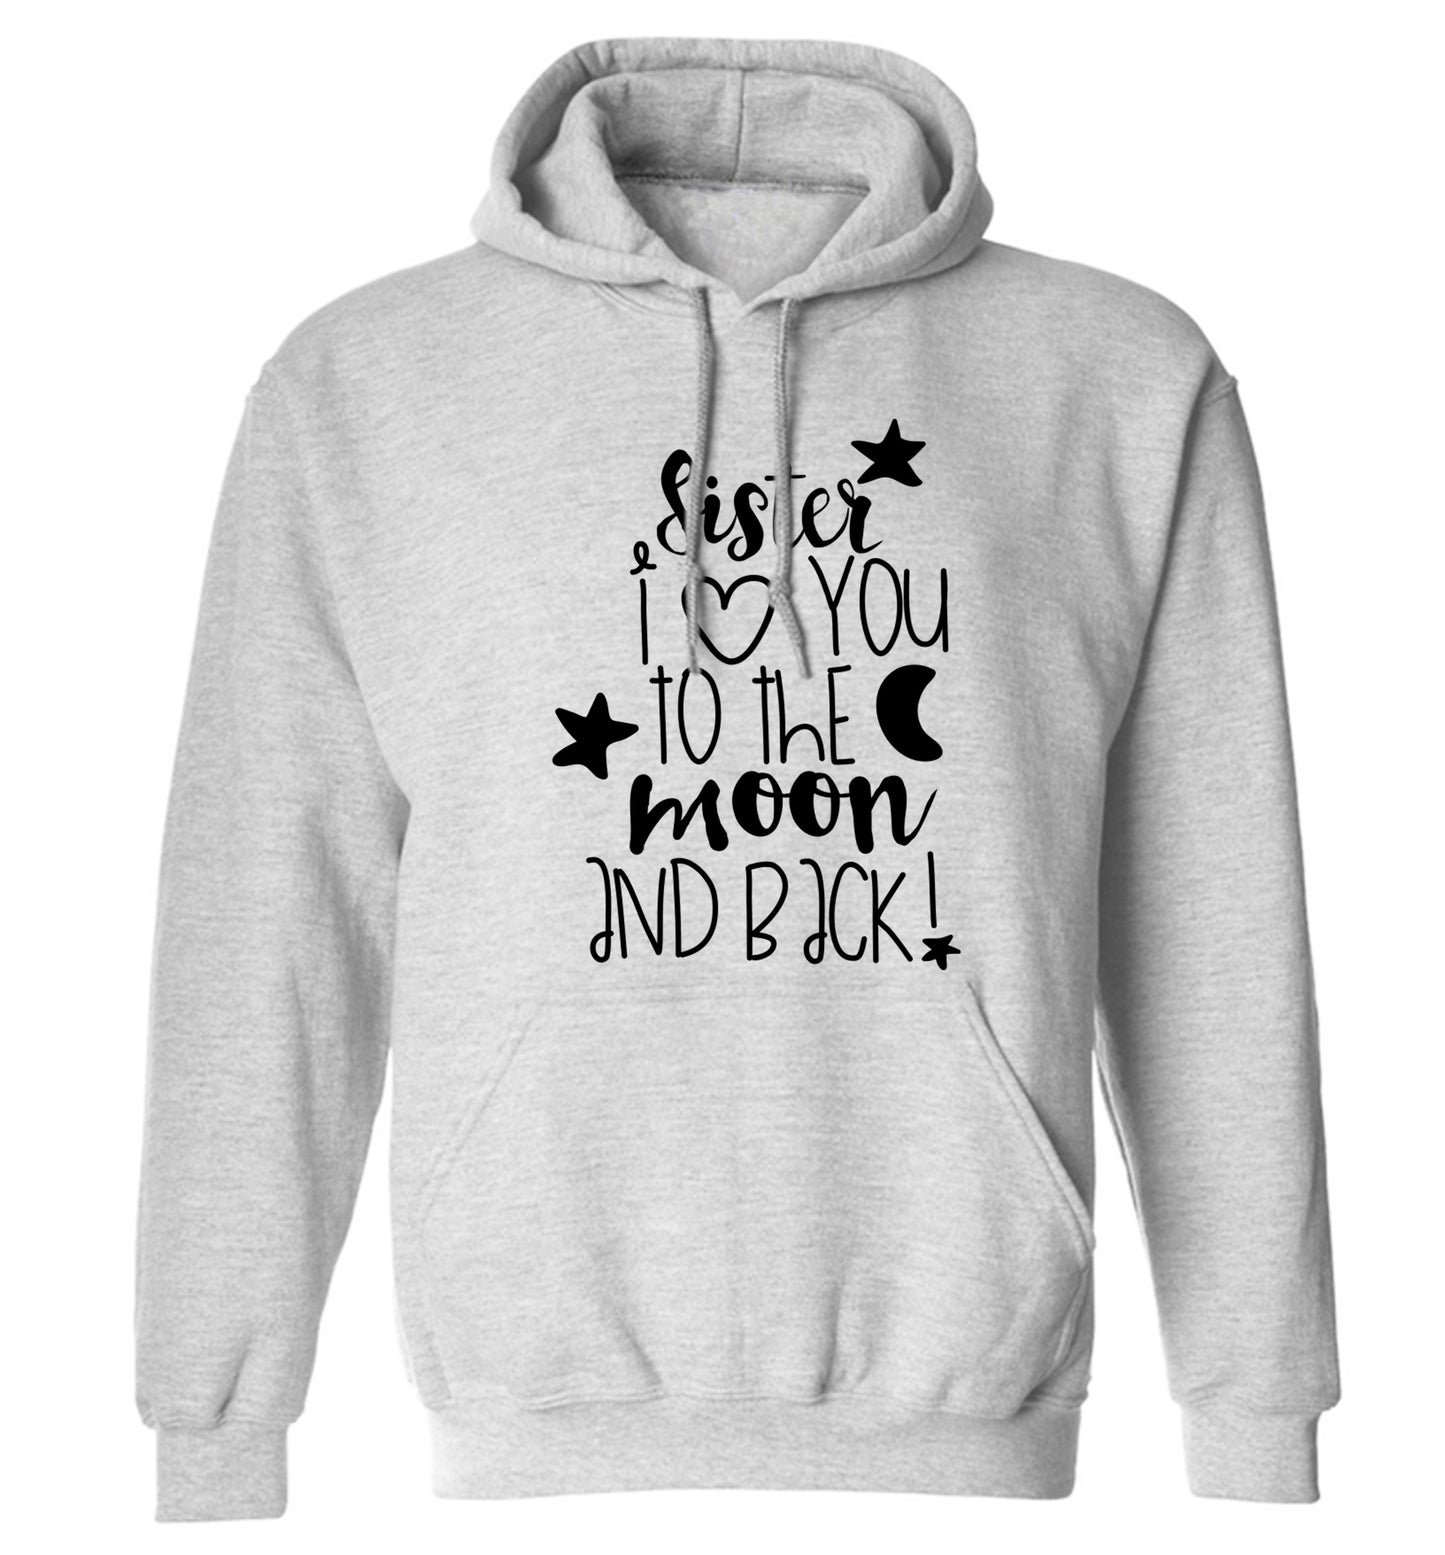 Sister I love you to the moon and back adults unisex grey hoodie 2XL